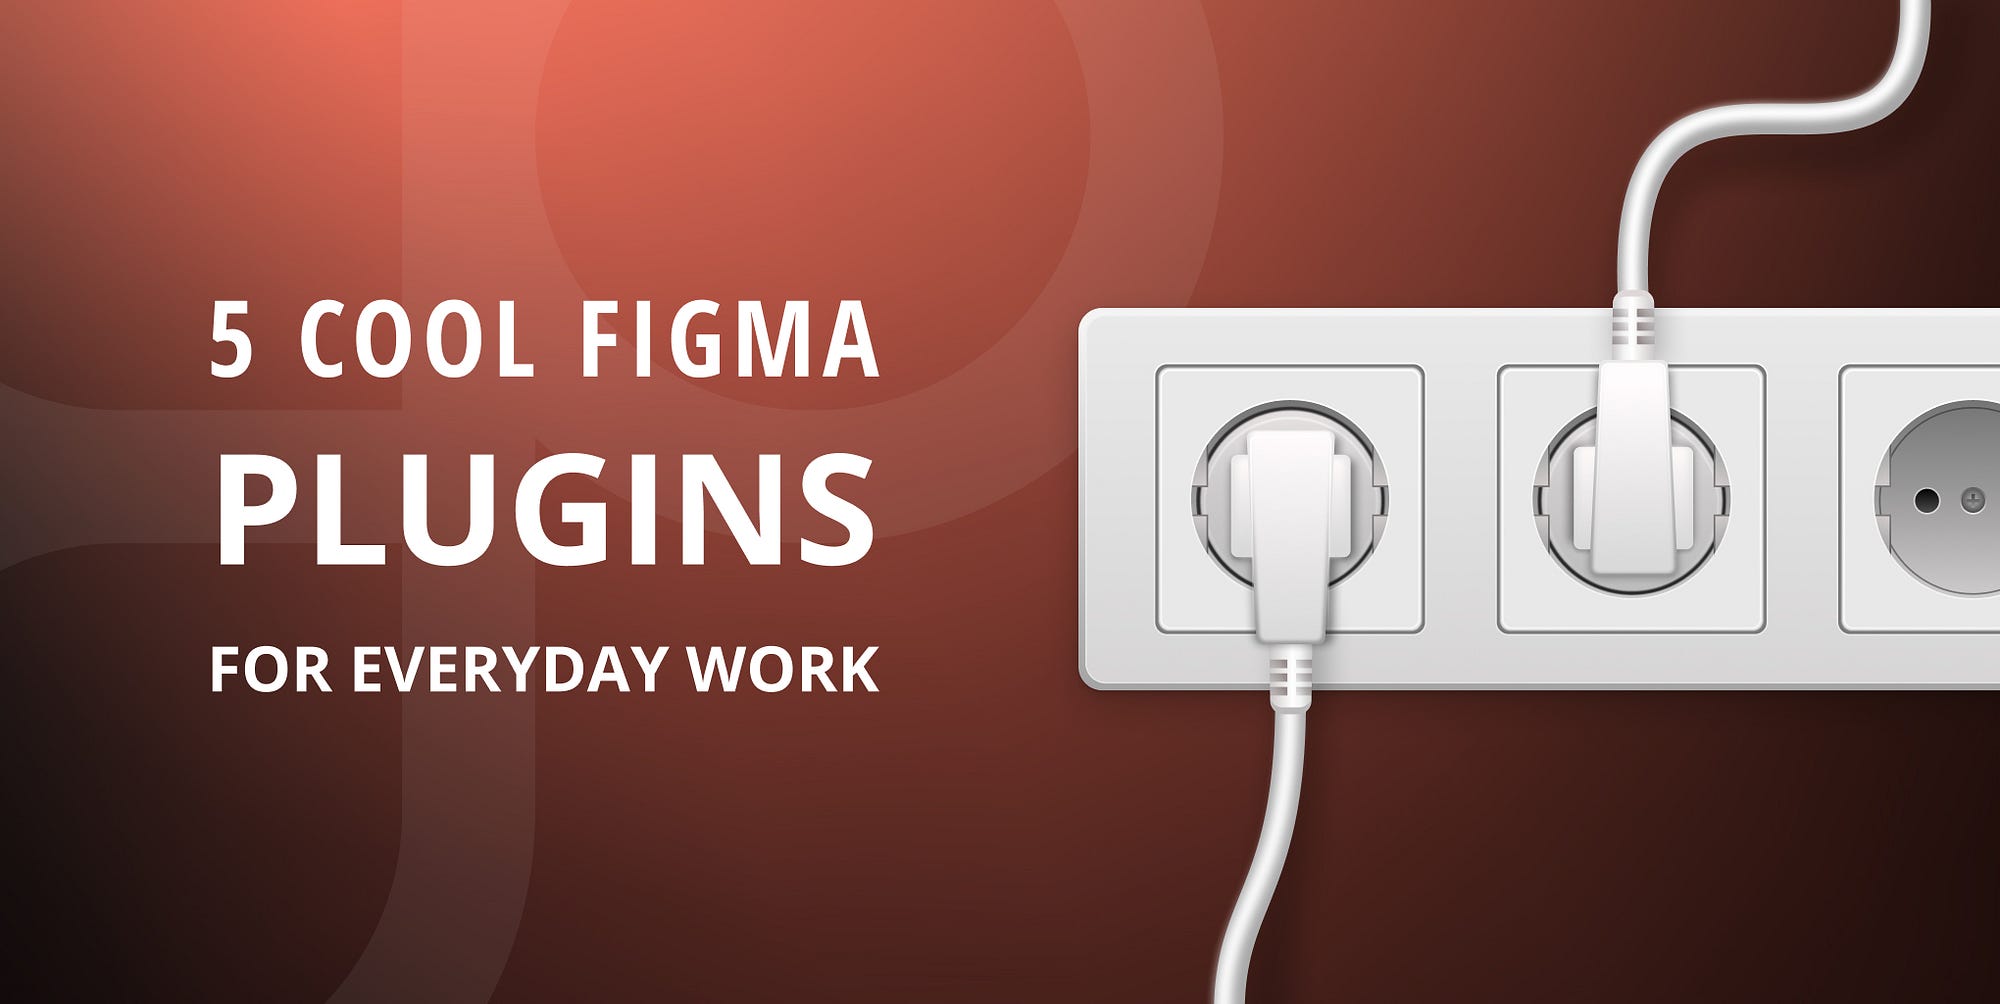 5 cool Figma plugins for everyday work